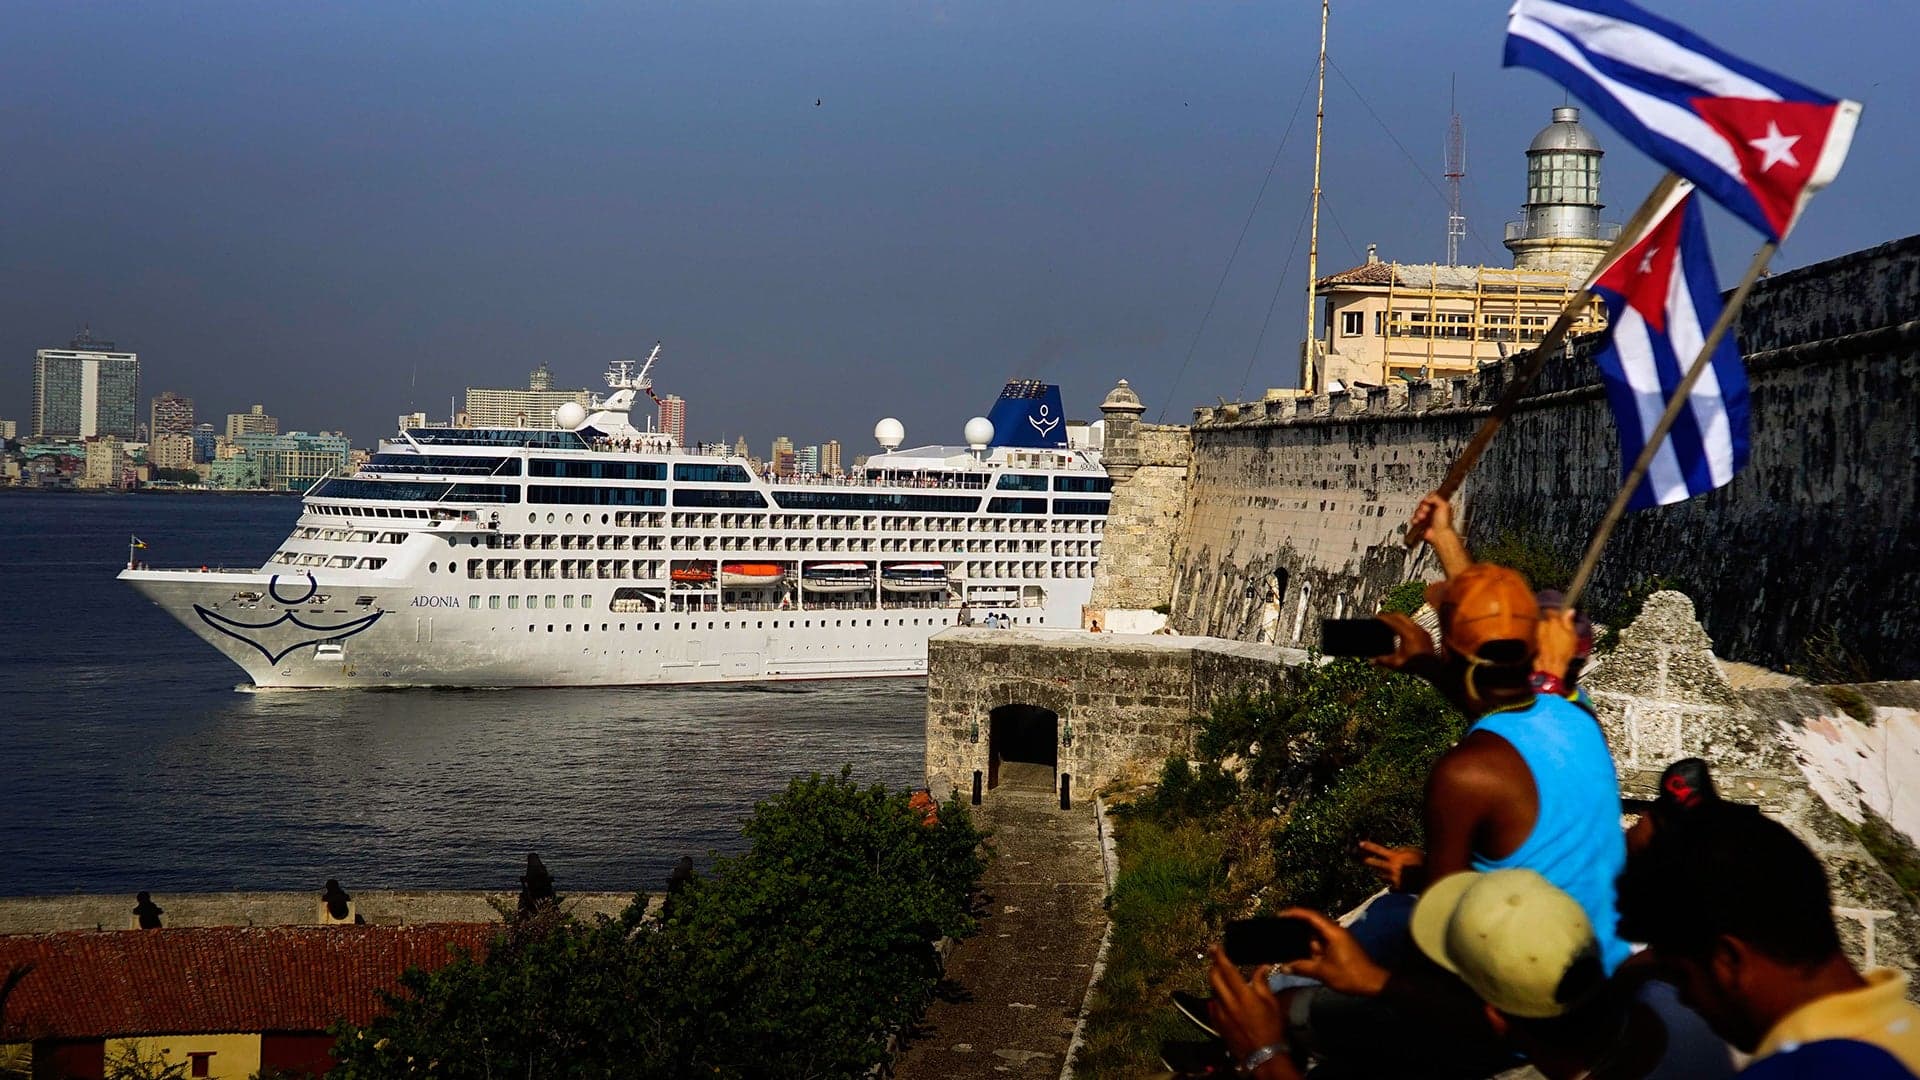 The First U.S. Cruise Ship in 40 Years Reaches Cuba